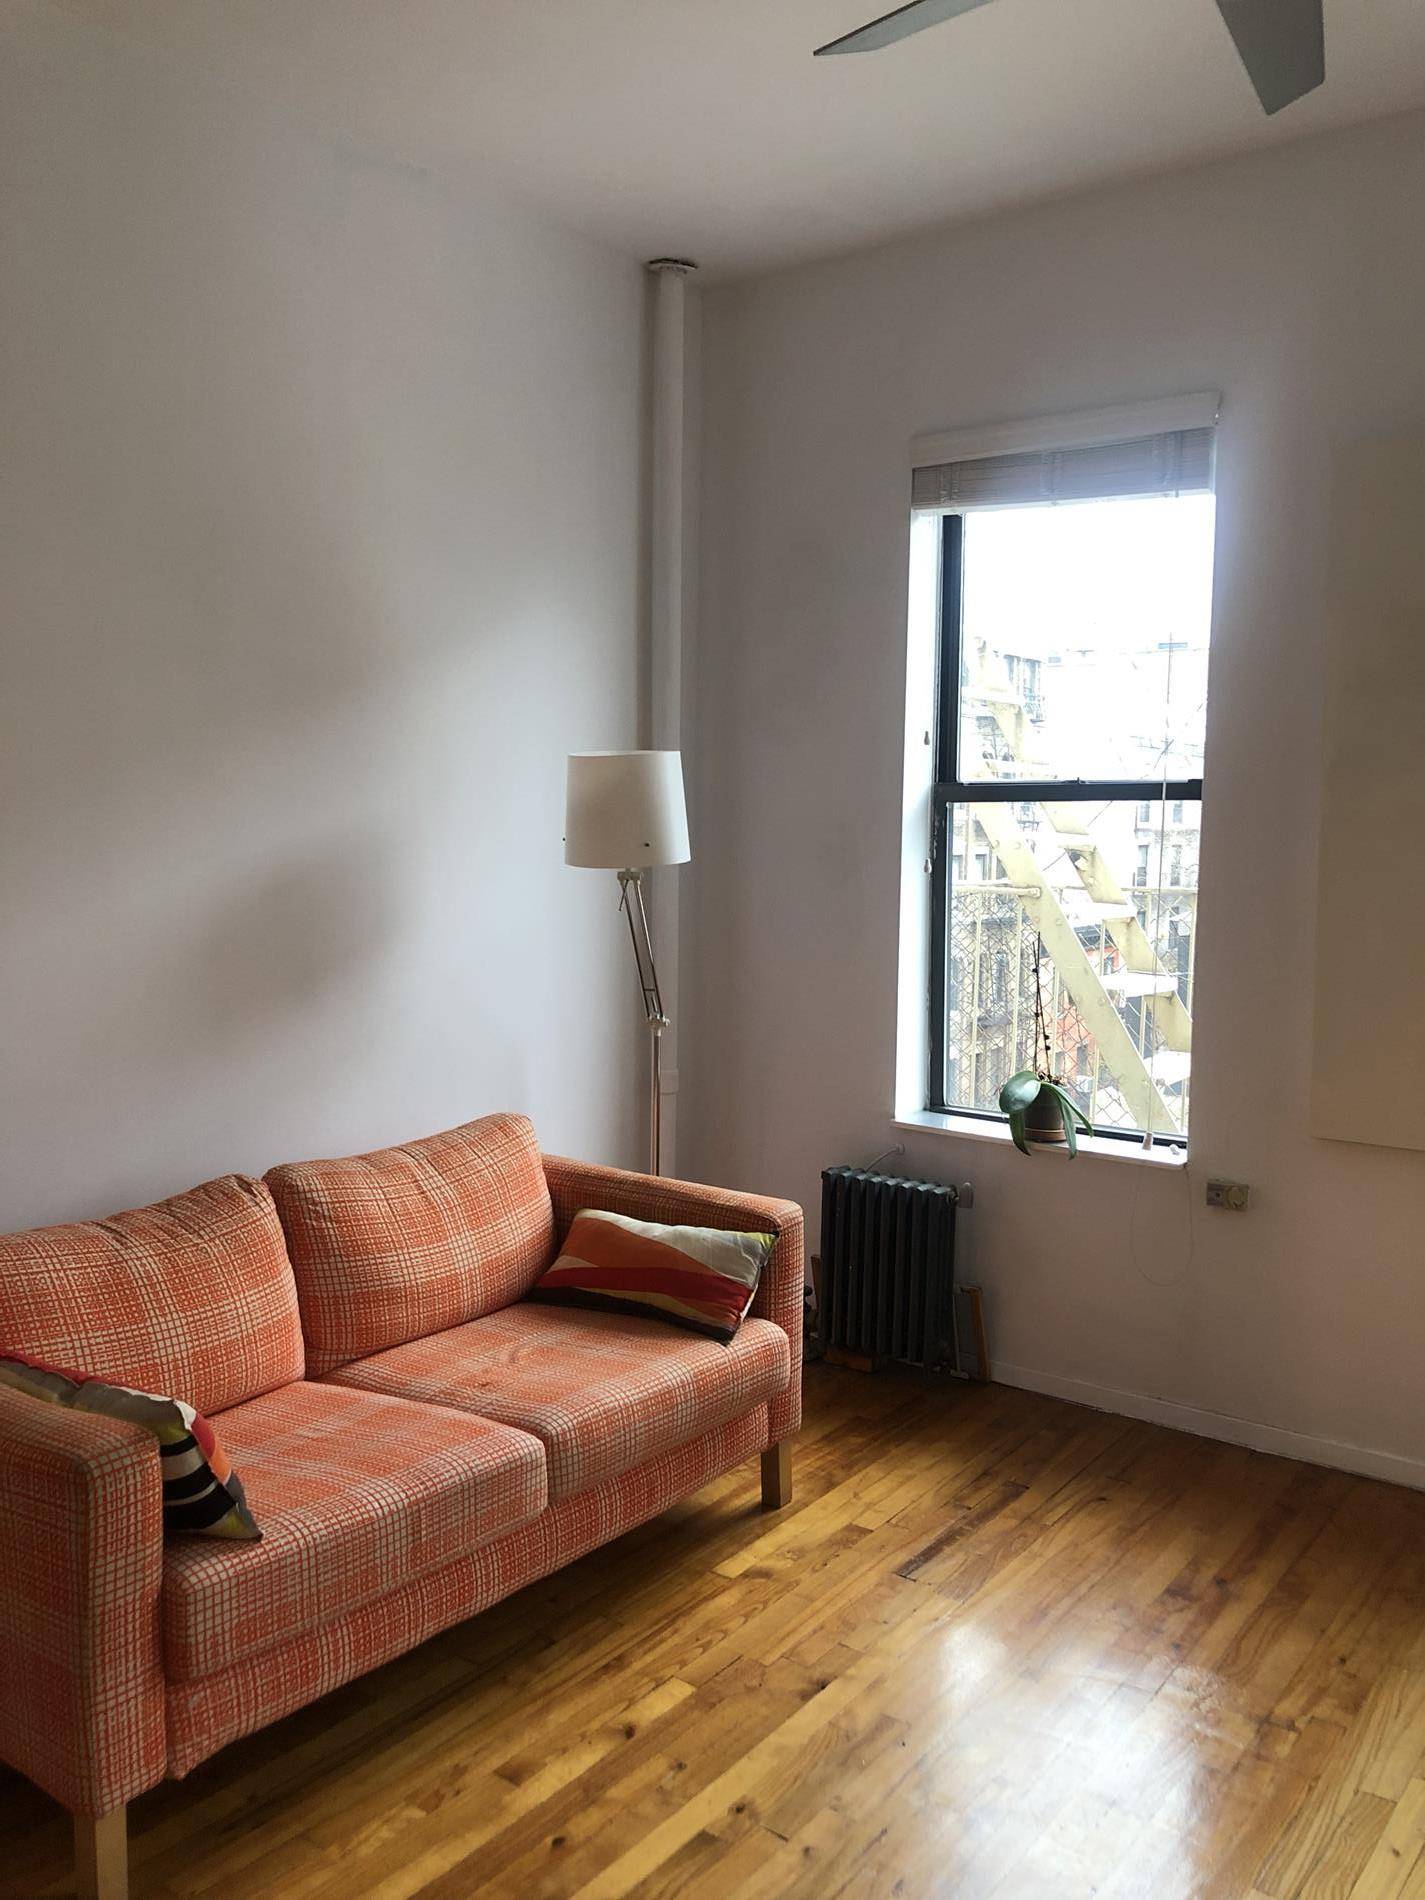 A fantastic studio, with high ceilings, charming exposed brick walls, and nice light in a well kept boutique co op building in the heart of Greenwich Village.